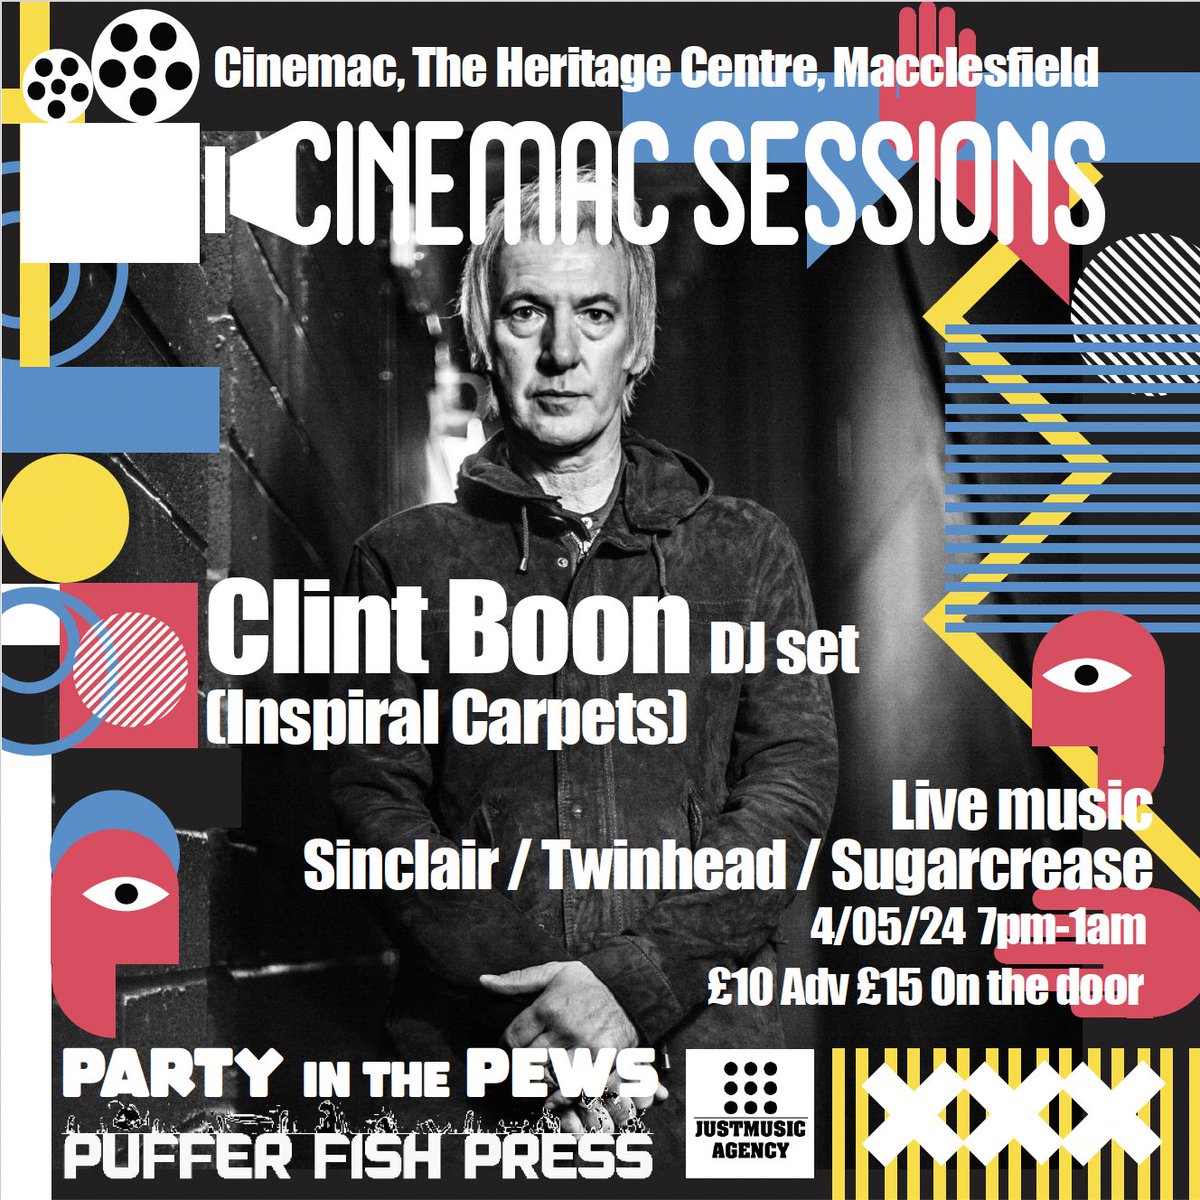 Less than a month to go until the legend that is Clint Boon is back at @CinemacCinema for @therealboon Returns with @SinclairBand , @Twinhead & @SugarCrease Tickets cinemaclive.co.uk/product/the-re… #choosemacc #supportlocal #maccafterdark #supportlivemusic #boonarmy